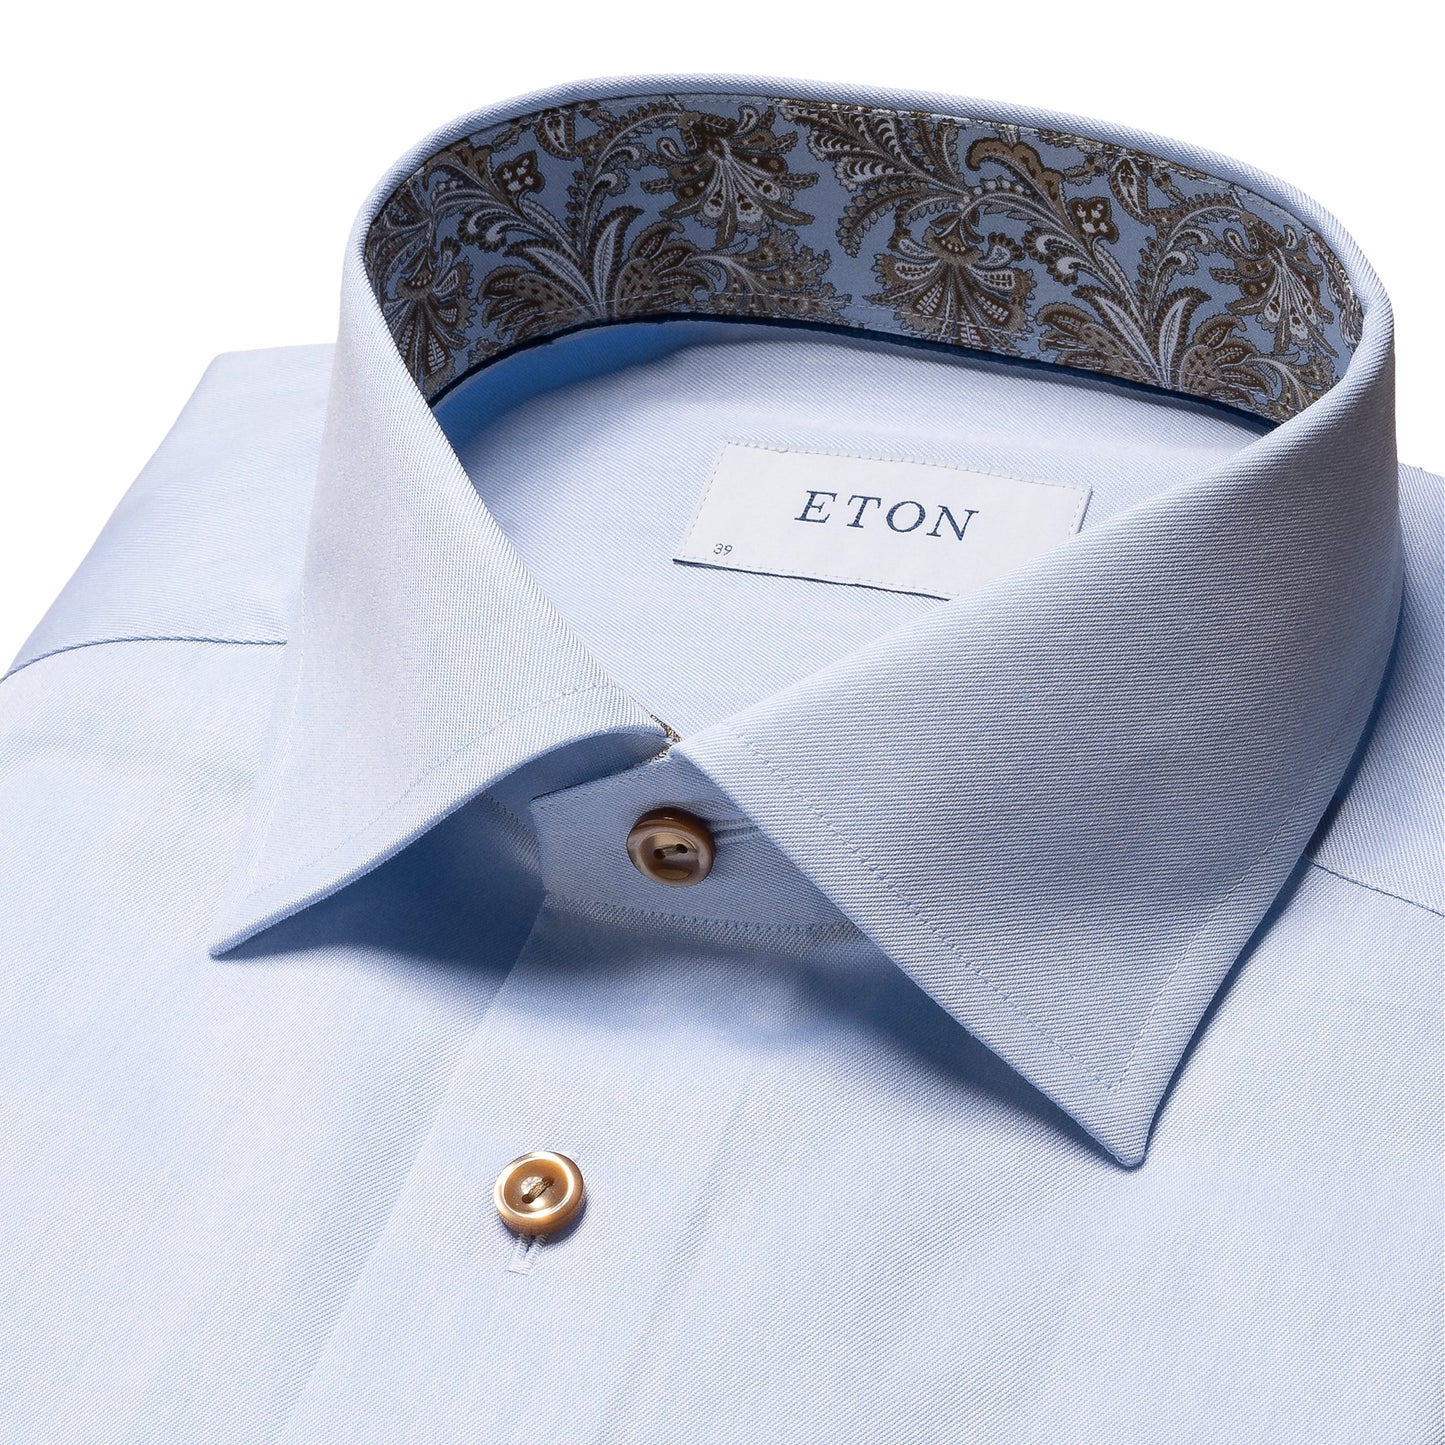 ETON Signature Twill Slim Fit Shirt  in Light Blue with Paisley Contrast Details 10001026921